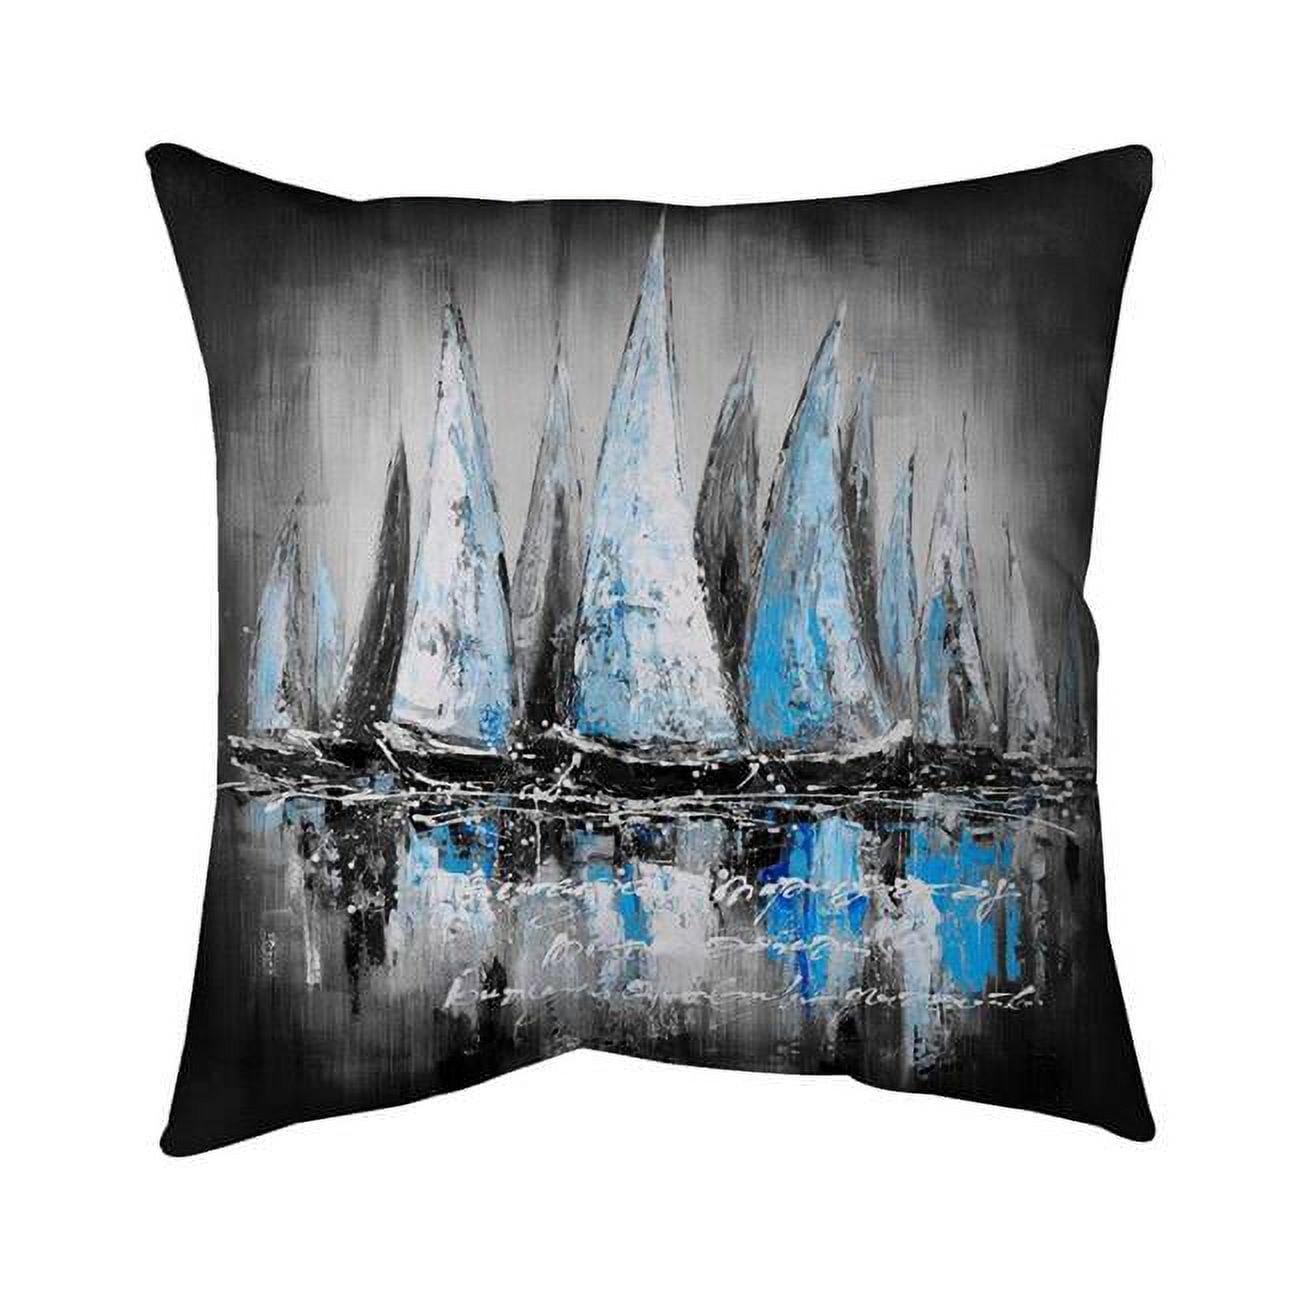 Begin Home Decor 5543-2020-CO27 20 x 20 in. Blue Sailboats-Double Sided Print Indoor Pillow Cover